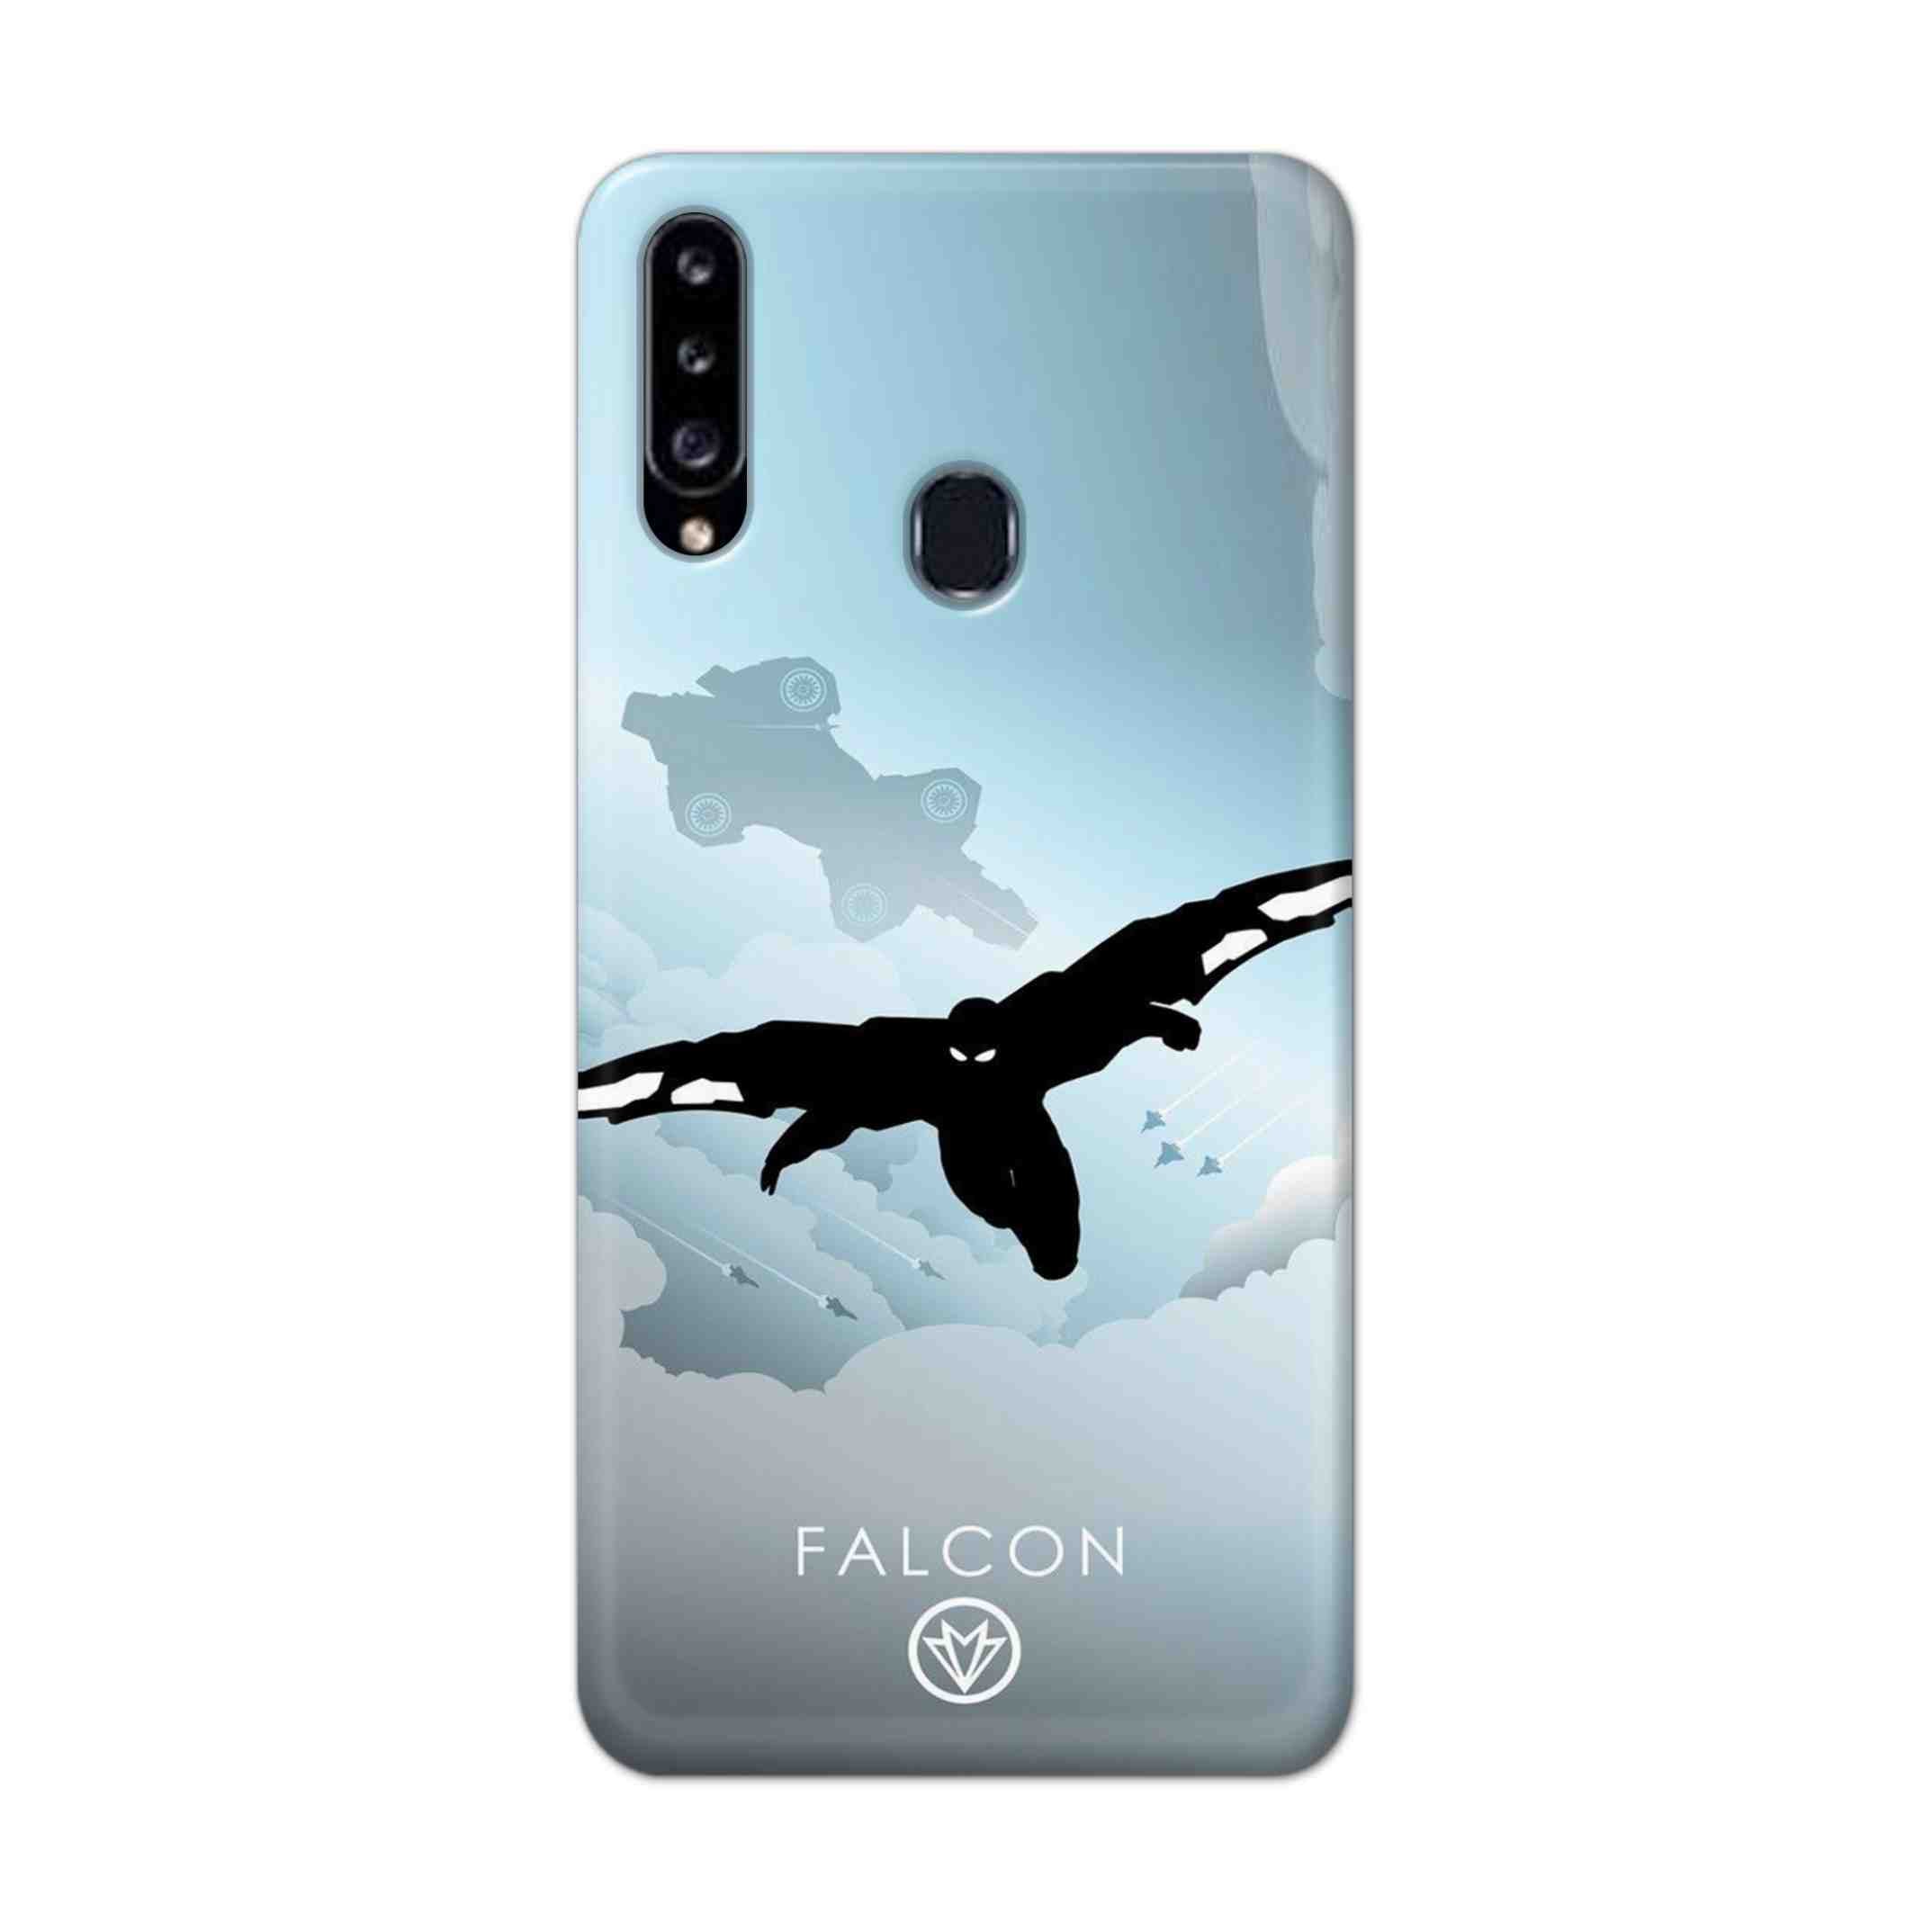 Buy Falcon Hard Back Mobile Phone Case Cover For Samsung Galaxy A21 Online